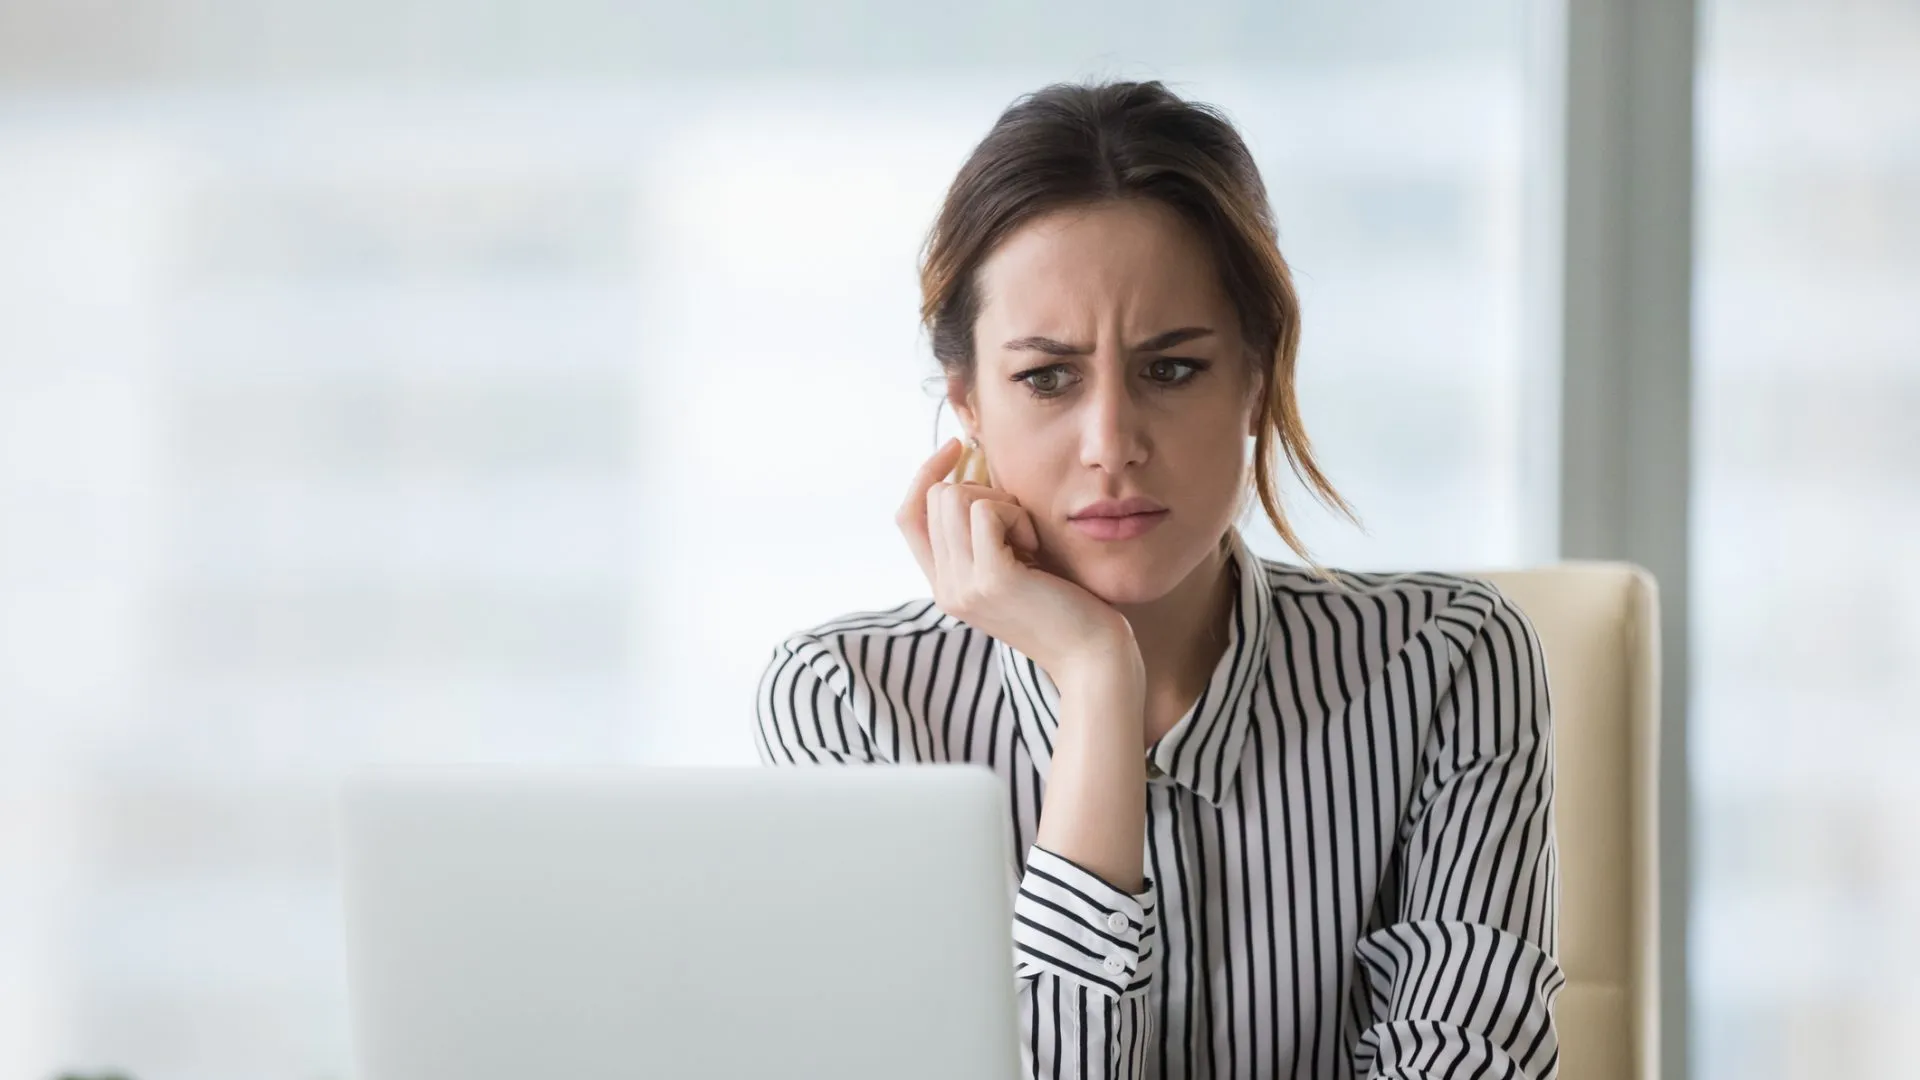 Confused businesswoman annoyed by online problem, spam email or fake internet news looking at laptop, female office worker feeling shocked about stuck computer, bewildered by scam message or virus.